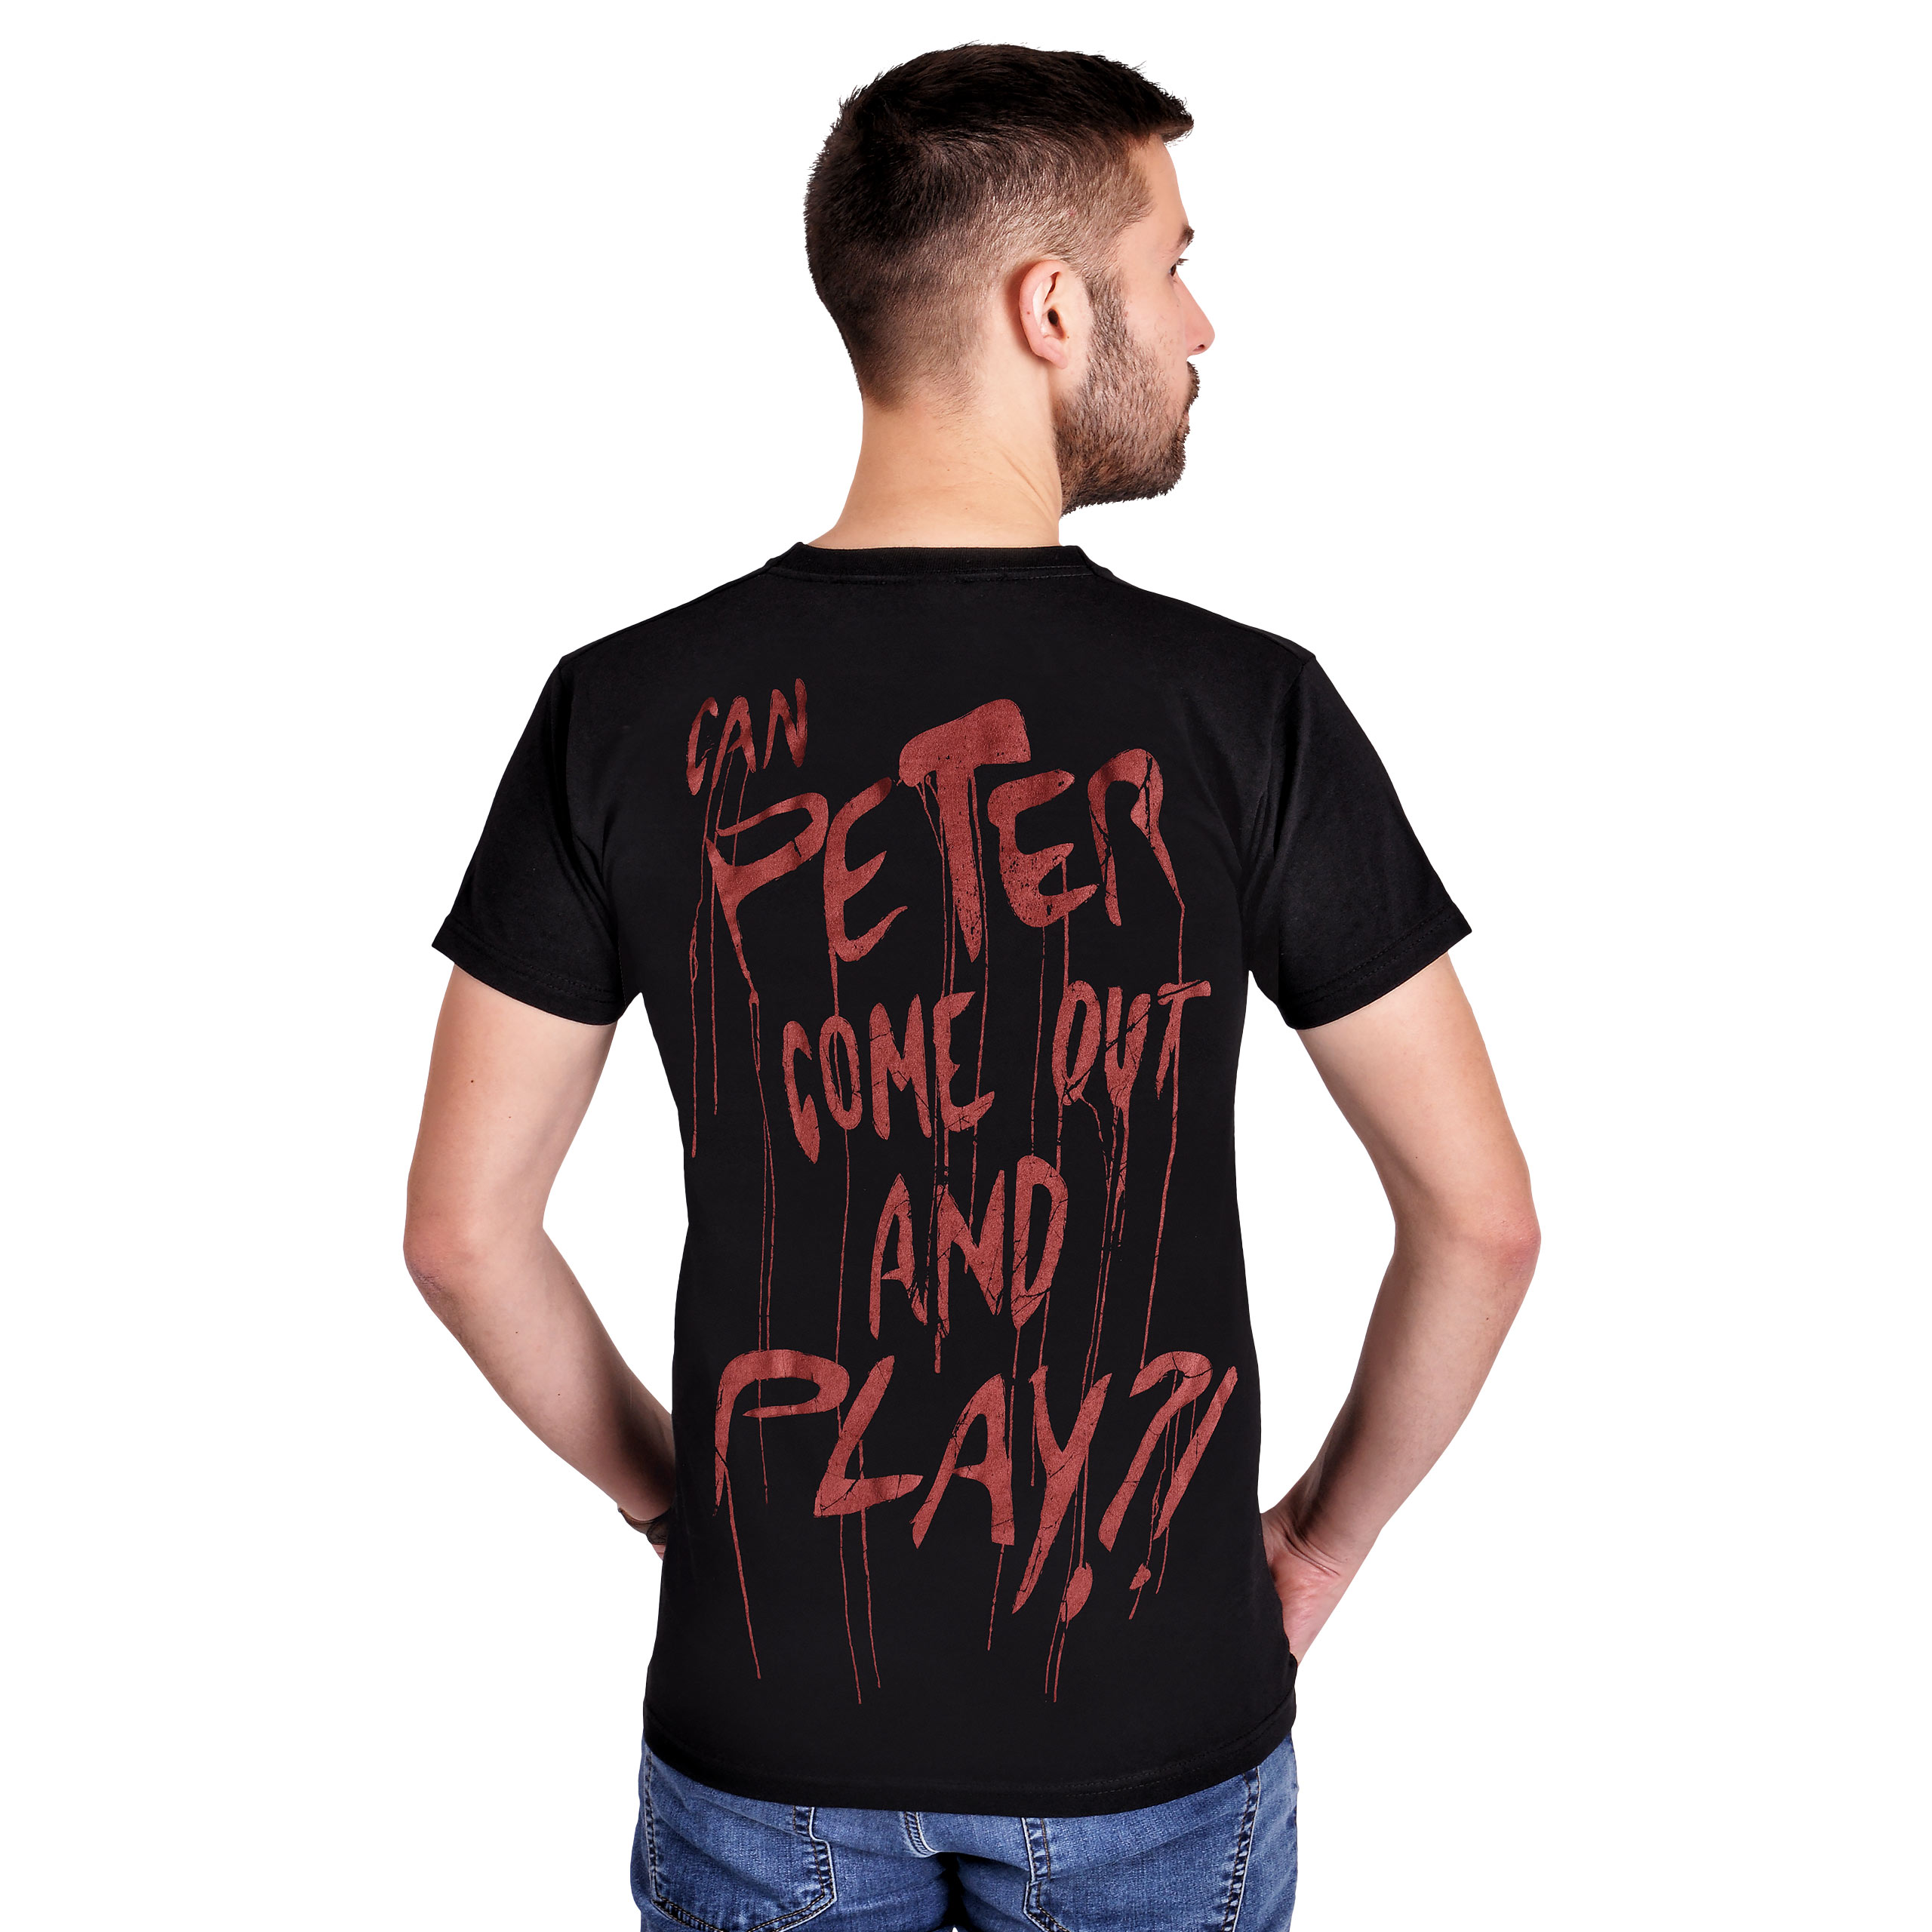 Venom - Peter Come Out And Play T-Shirt Black